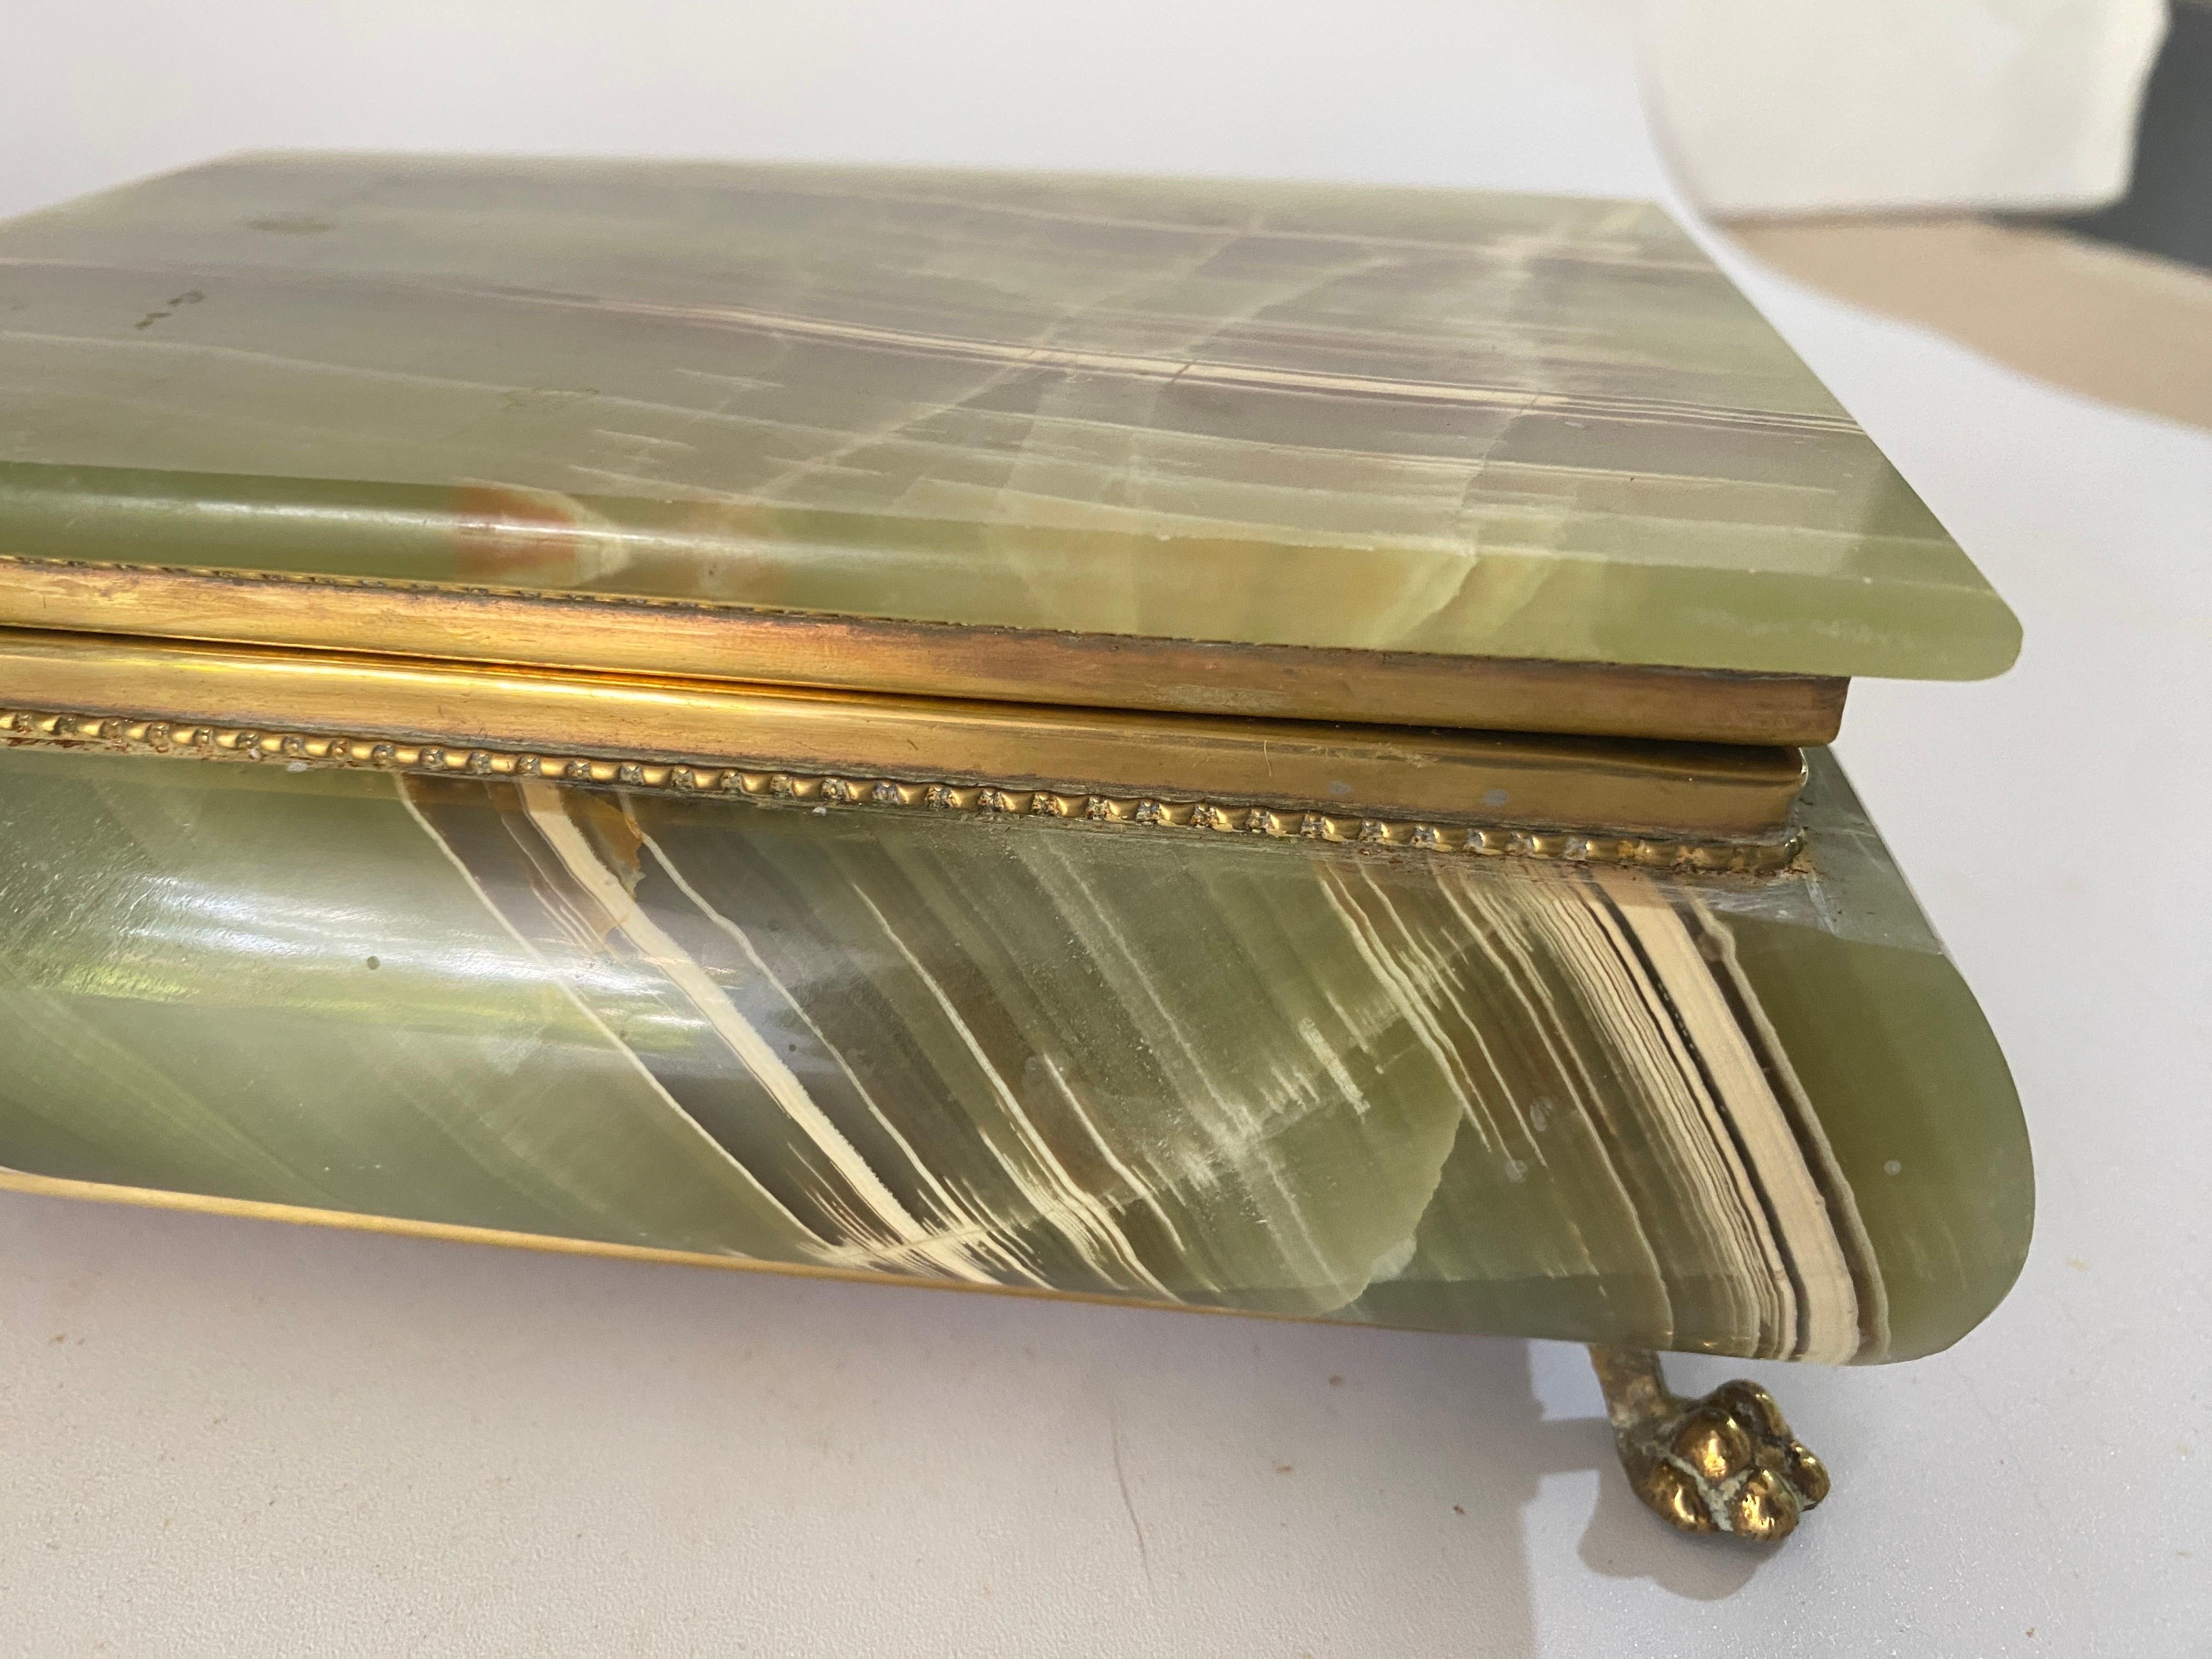  Green Onyx Marble and Brass Jewelry Display Box, Italy 1950 For Sale 8